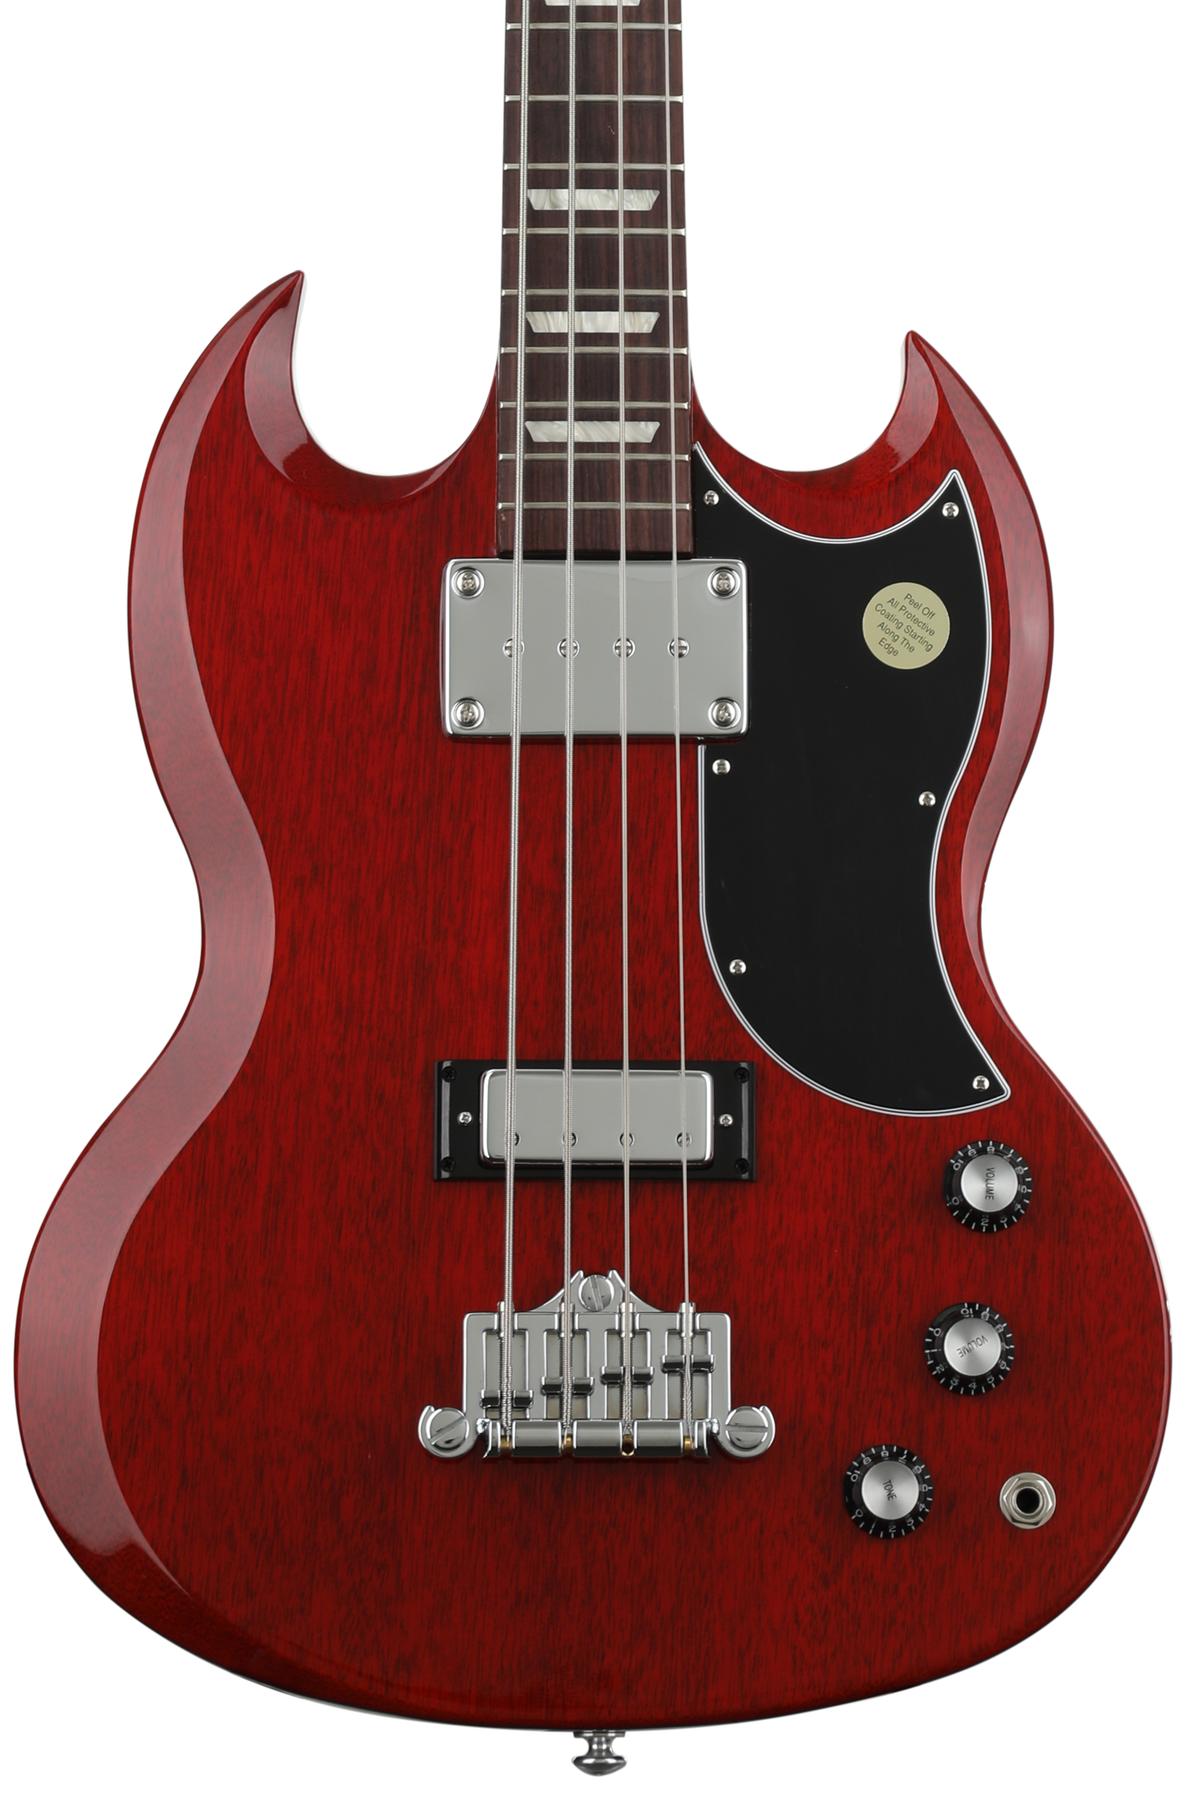 Gibson SG Standard Bass - Heritage Cherry | Sweetwater